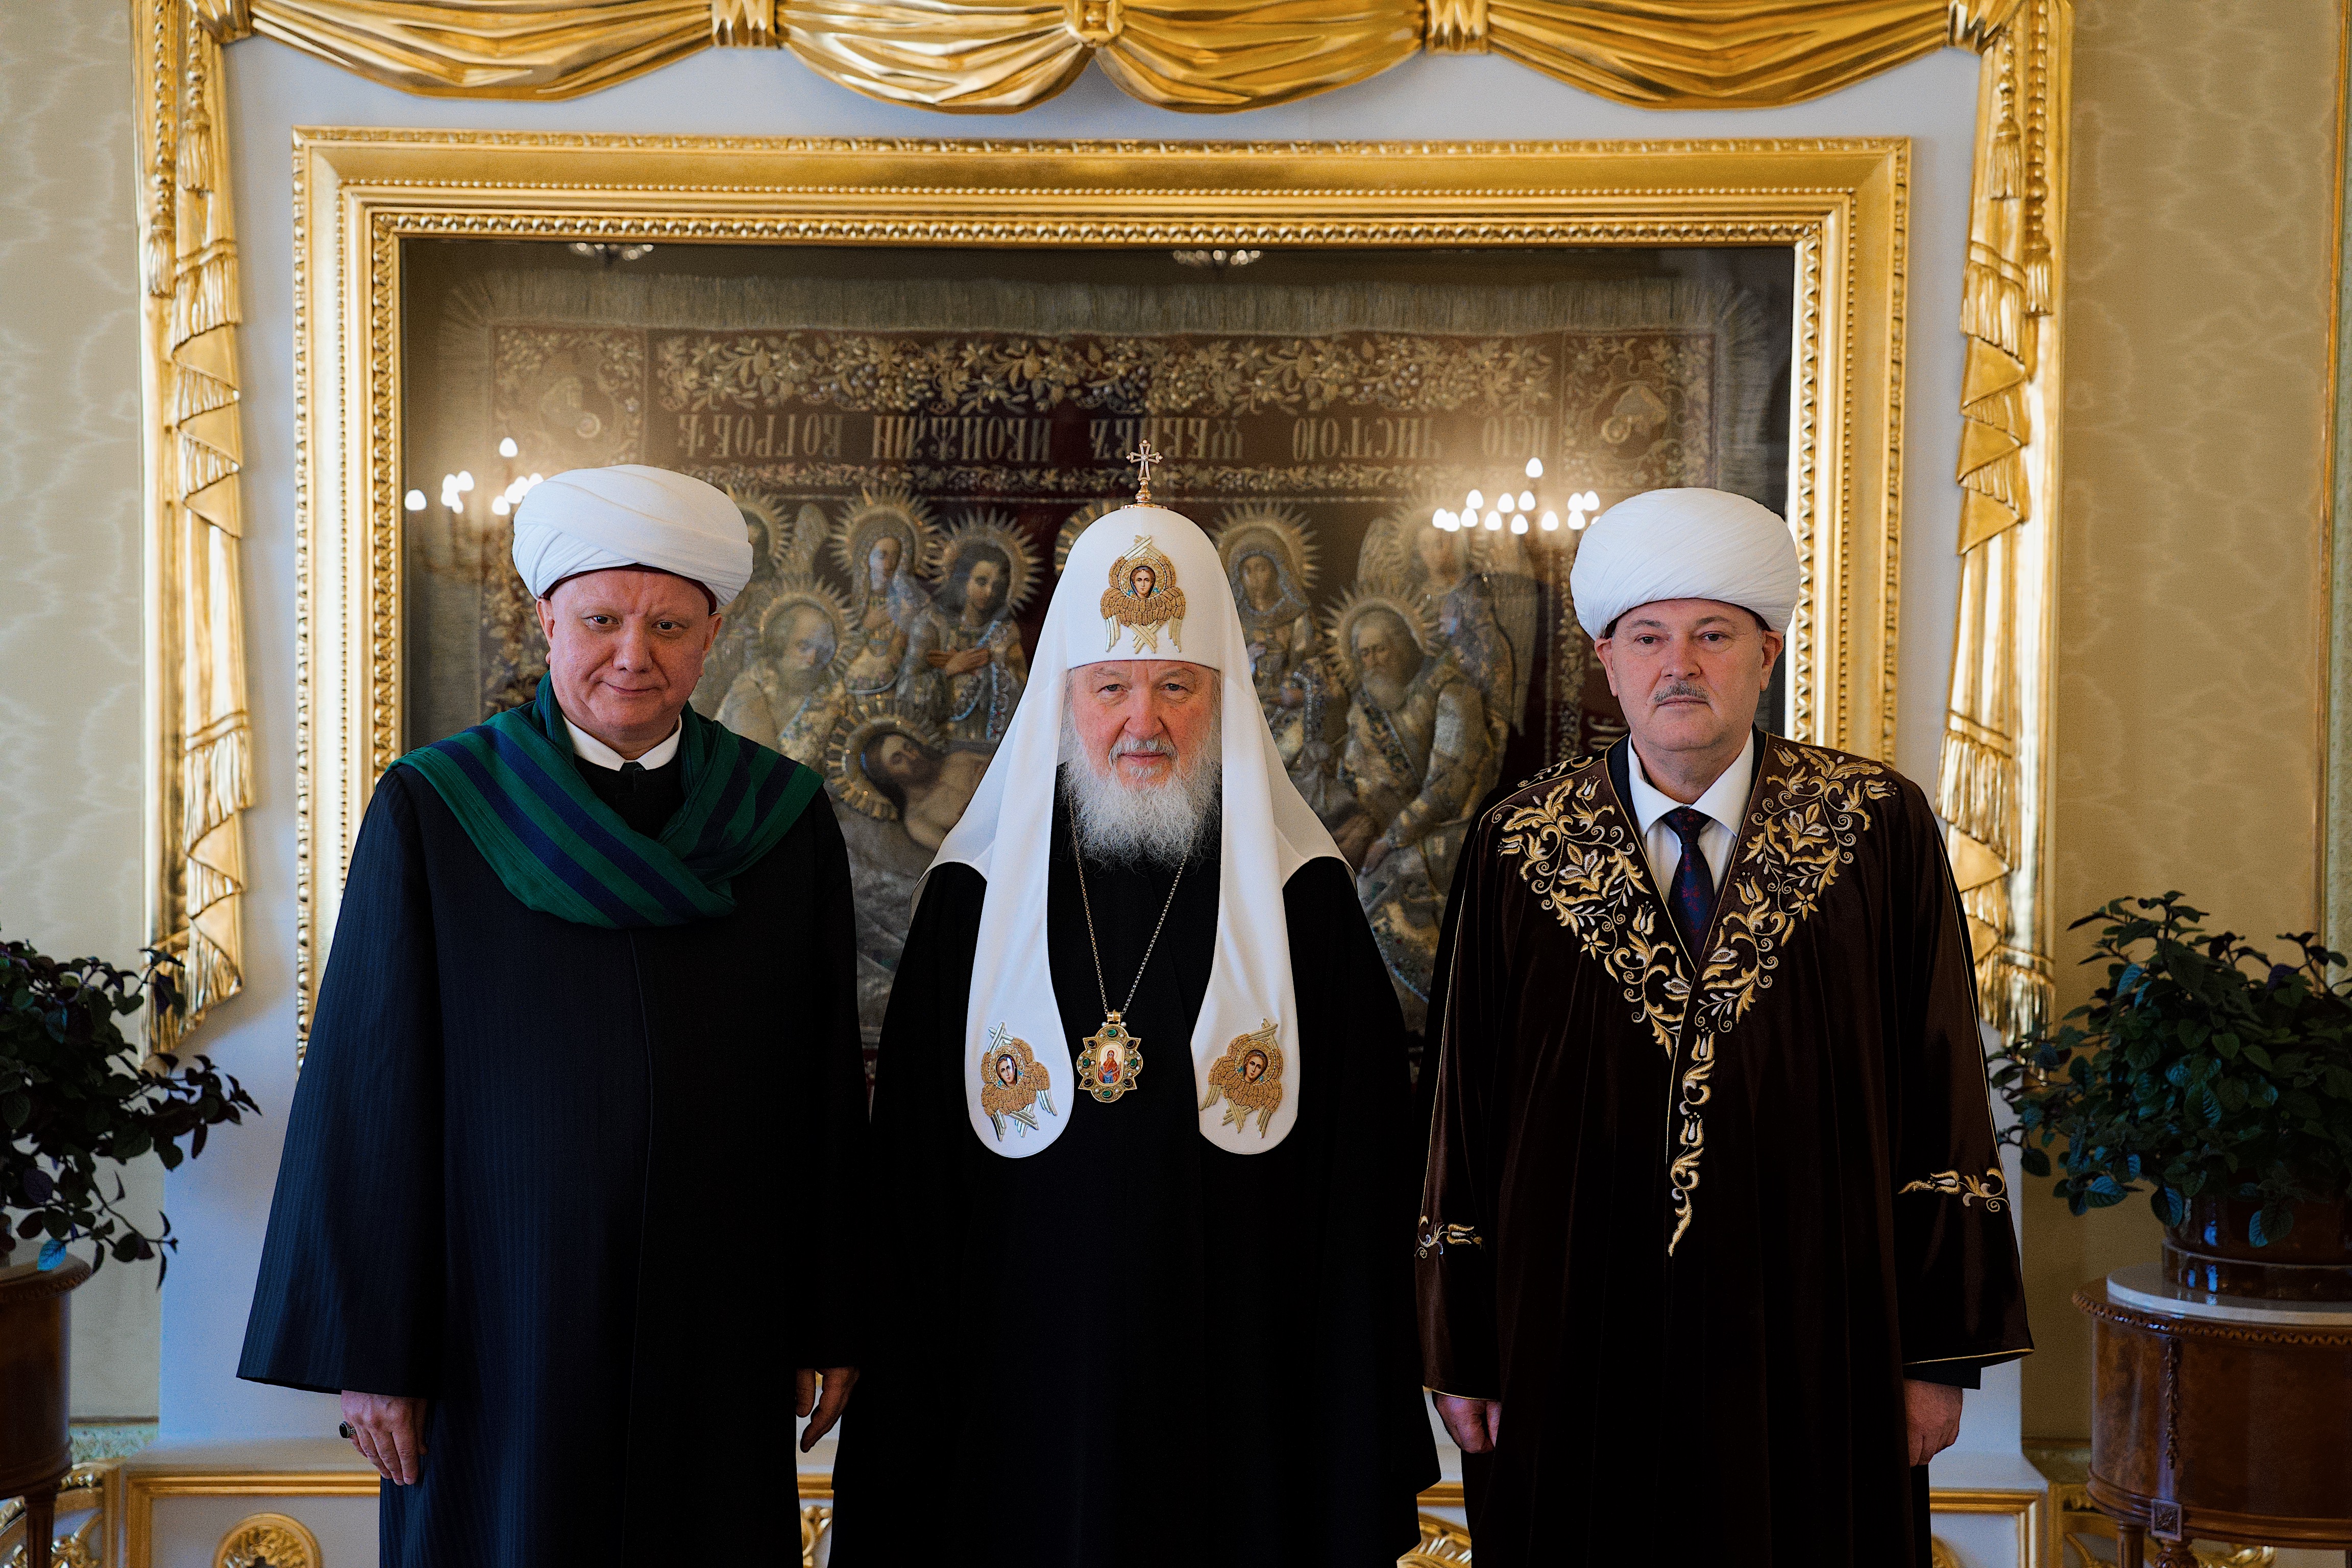 MEETING OF HOLY PATRIARCH OF MOSCOW AND ALL RUSSIA KIRILL WITH A DELEGATION OF MUSLIM LEADERS HEADED BY MUFTI OF SAMR ALBIR KHAZRAT KRGANOV